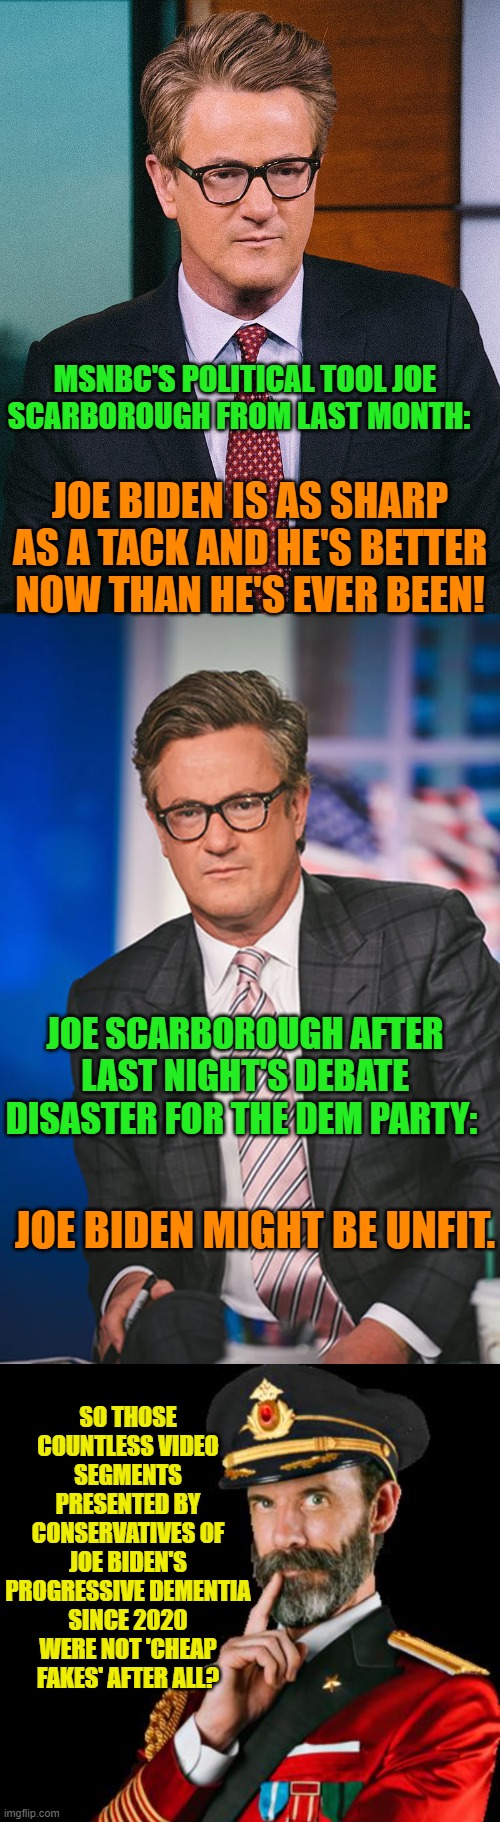 Tell us what you REALLY think leftists. | MSNBC'S POLITICAL TOOL JOE SCARBOROUGH FROM LAST MONTH:; JOE BIDEN IS AS SHARP AS A TACK AND HE'S BETTER NOW THAN HE'S EVER BEEN! JOE SCARBOROUGH AFTER LAST NIGHT'S DEBATE DISASTER FOR THE DEM PARTY:; JOE BIDEN MIGHT BE UNFIT. SO THOSE COUNTLESS VIDEO SEGMENTS PRESENTED BY CONSERVATIVES OF JOE BIDEN'S PROGRESSIVE DEMENTIA SINCE 2020 WERE NOT 'CHEAP FAKES' AFTER ALL? | image tagged in yep | made w/ Imgflip meme maker